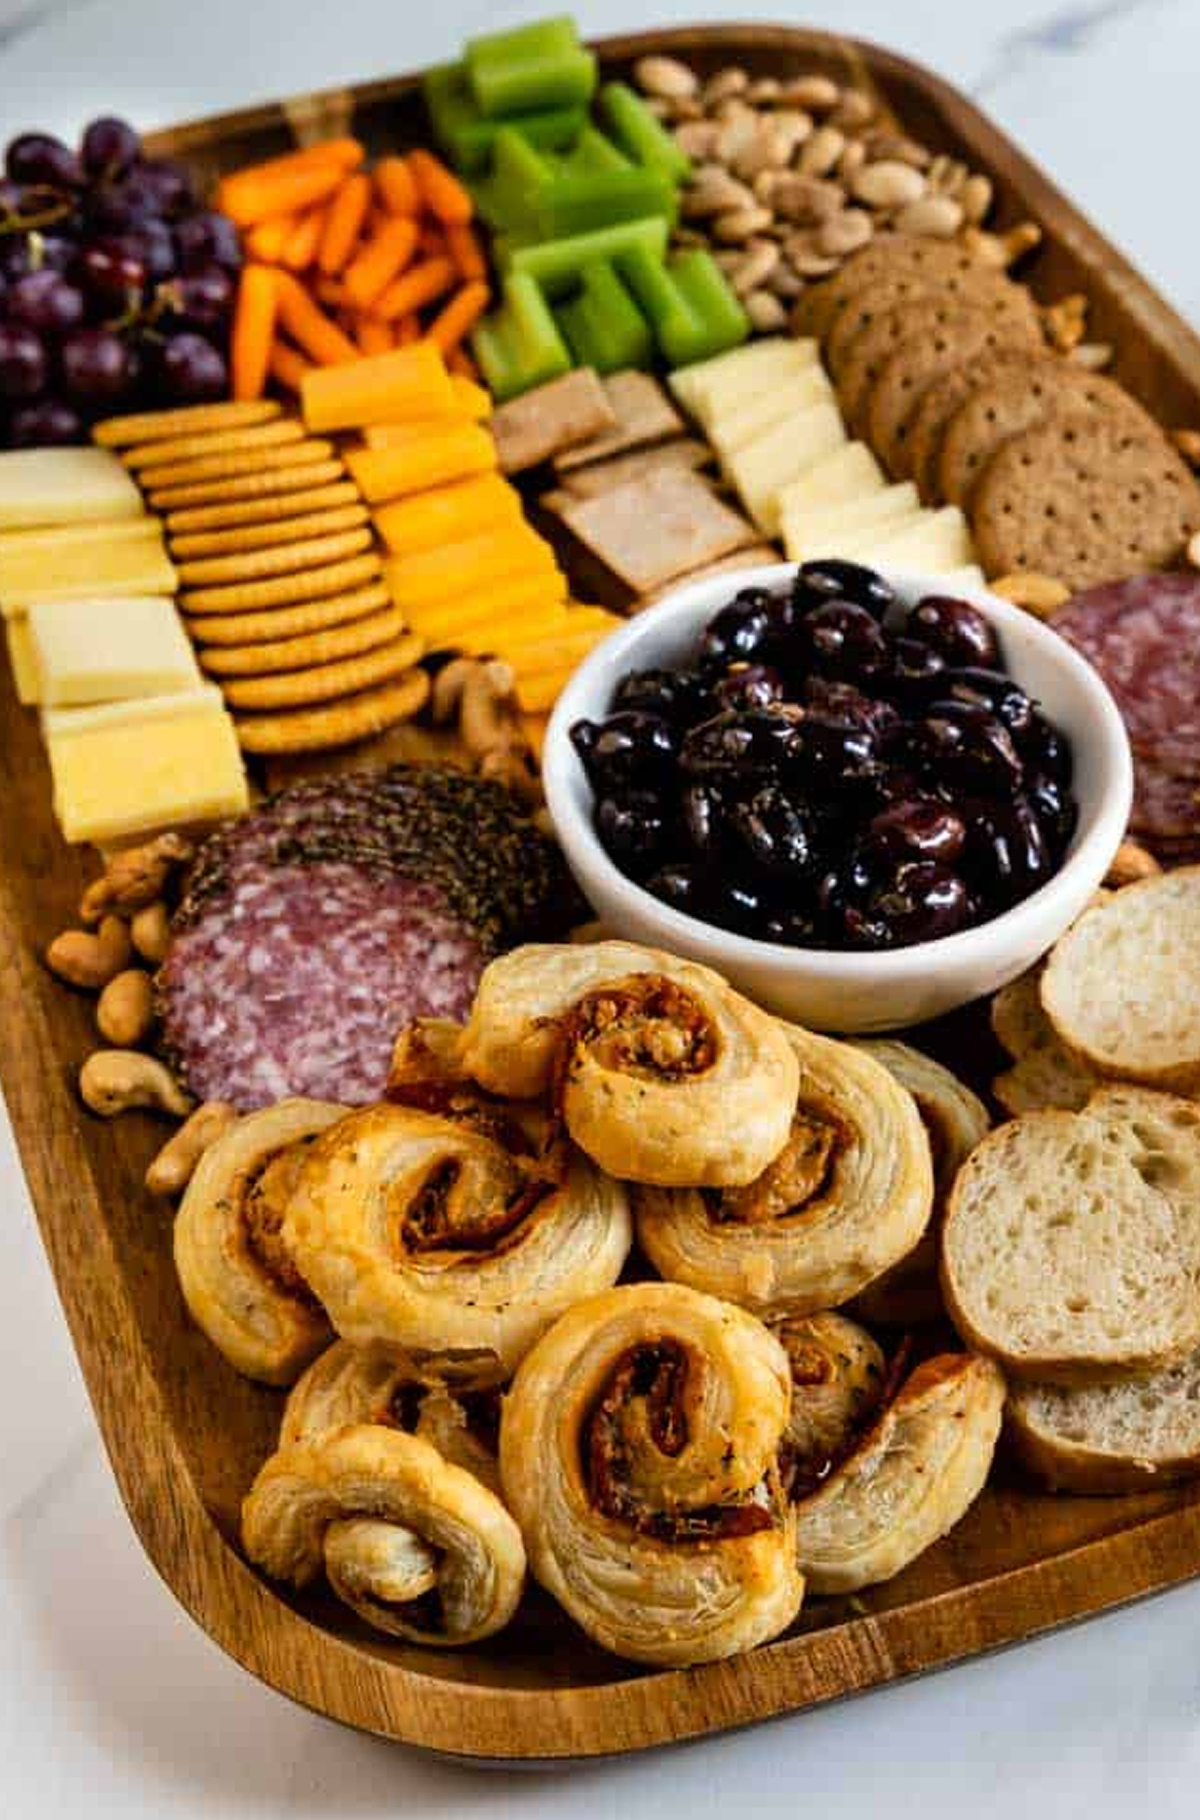 Easy Good Ideas board displays crackers, cheese, celery, carrots, meats, and grapes.